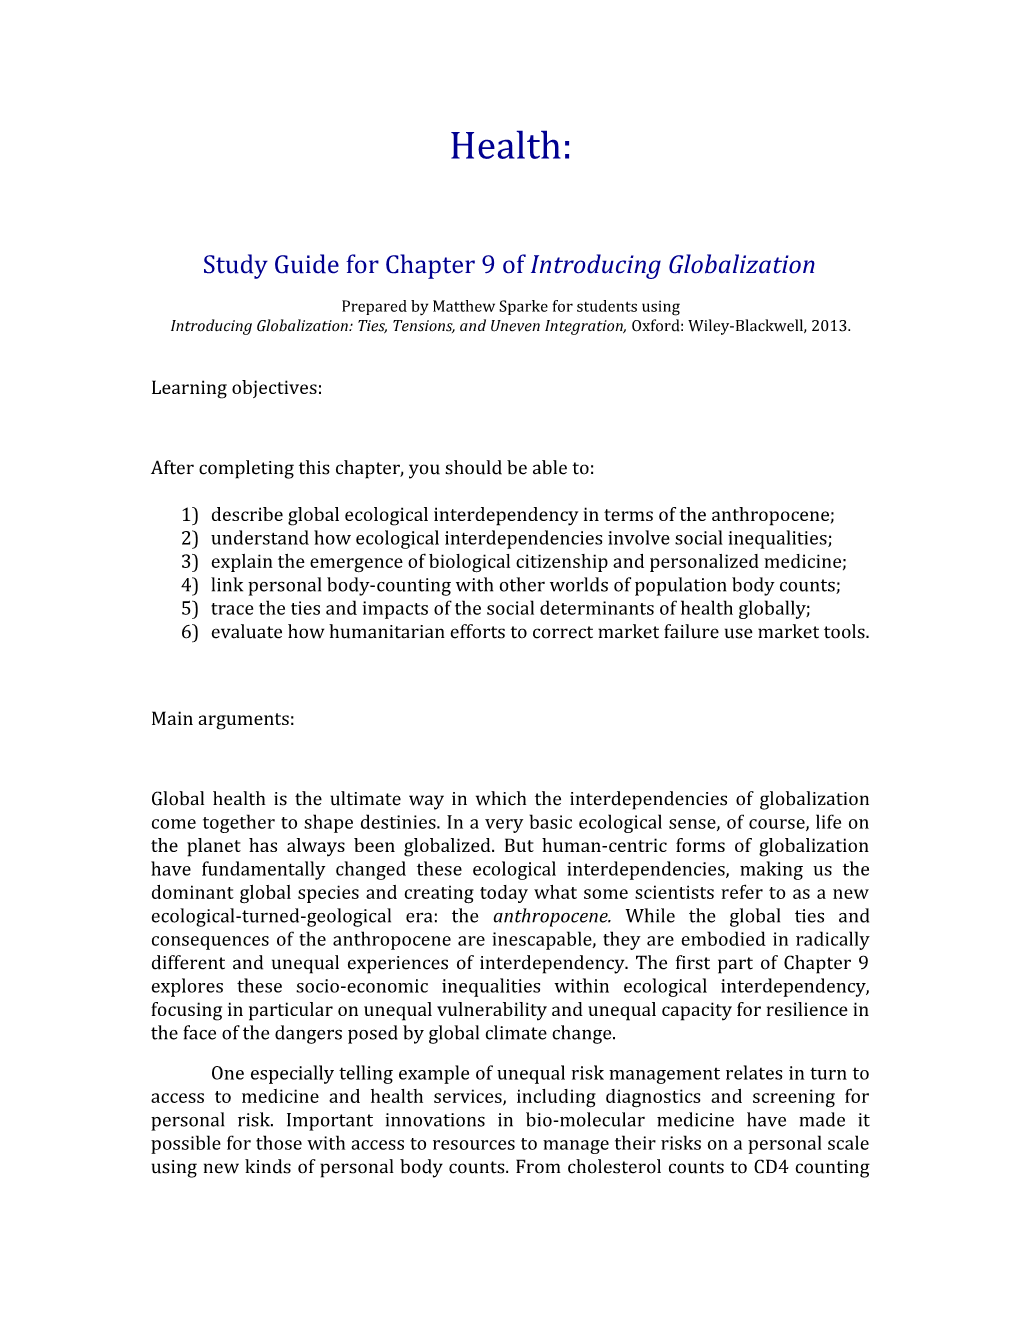 Study Guide for Chapter 9 of Introducingglobalization